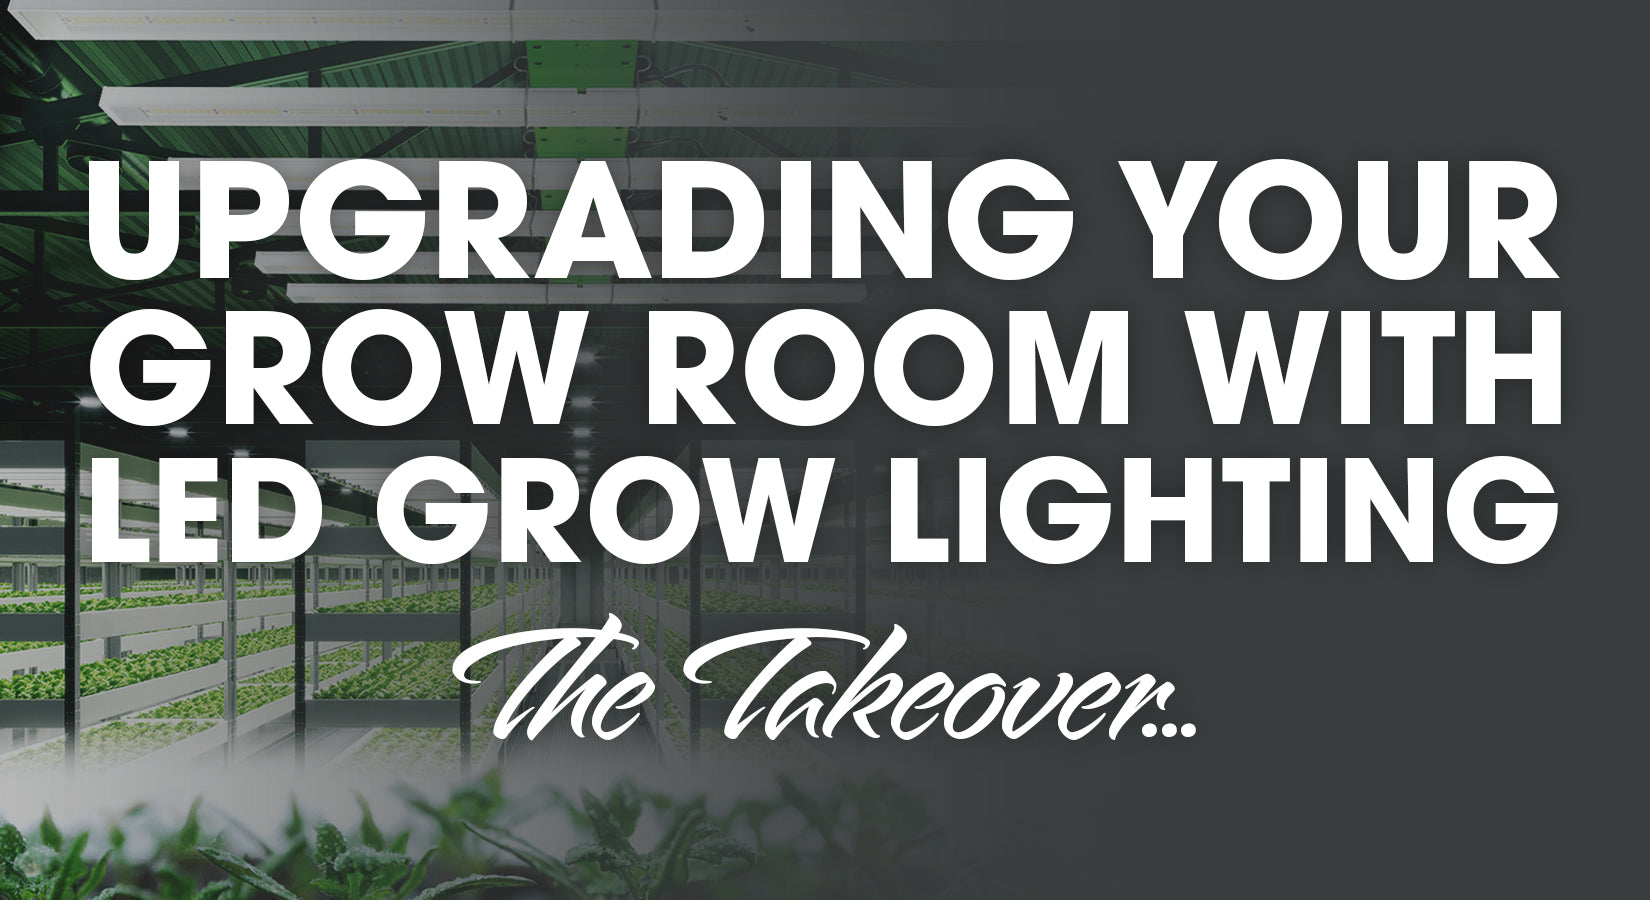 Upgrading Your Grow Room with LED Lighting (The Takeover)